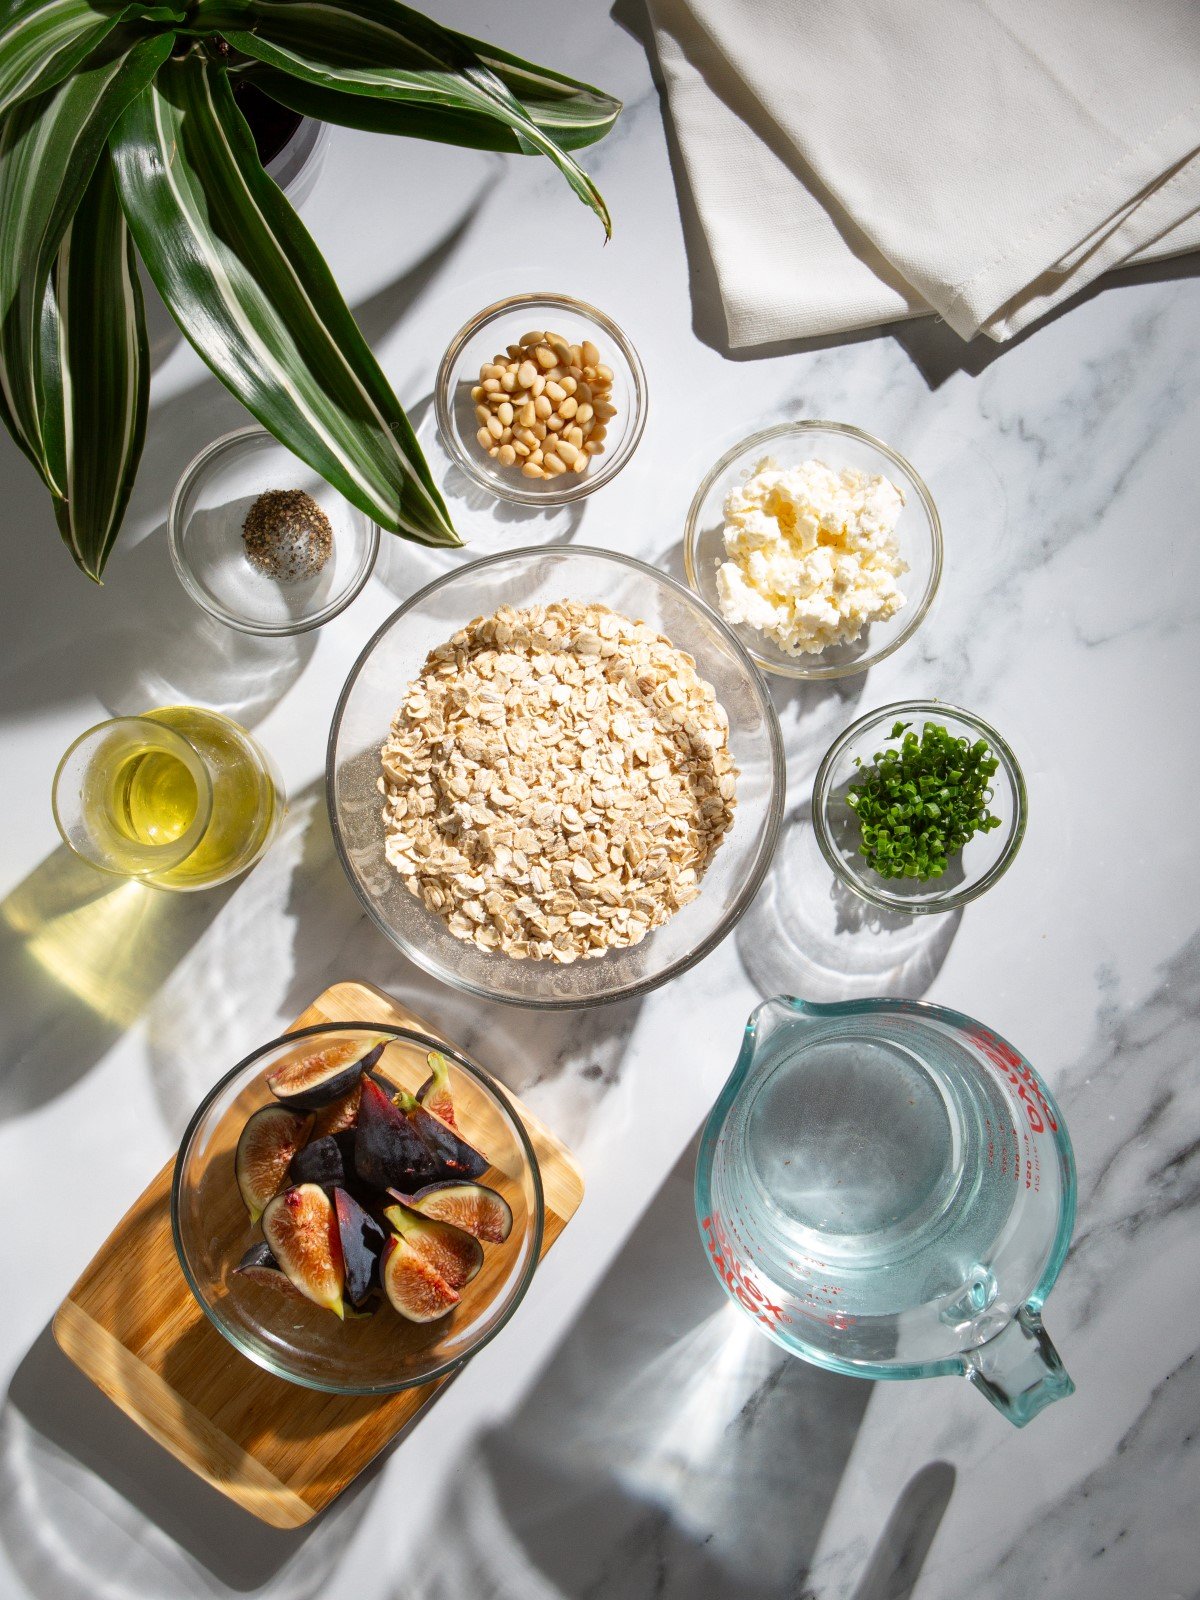 Glass bowls filled with oatmeal, figs, feta, water, and other ingredients with a plant and napkins.